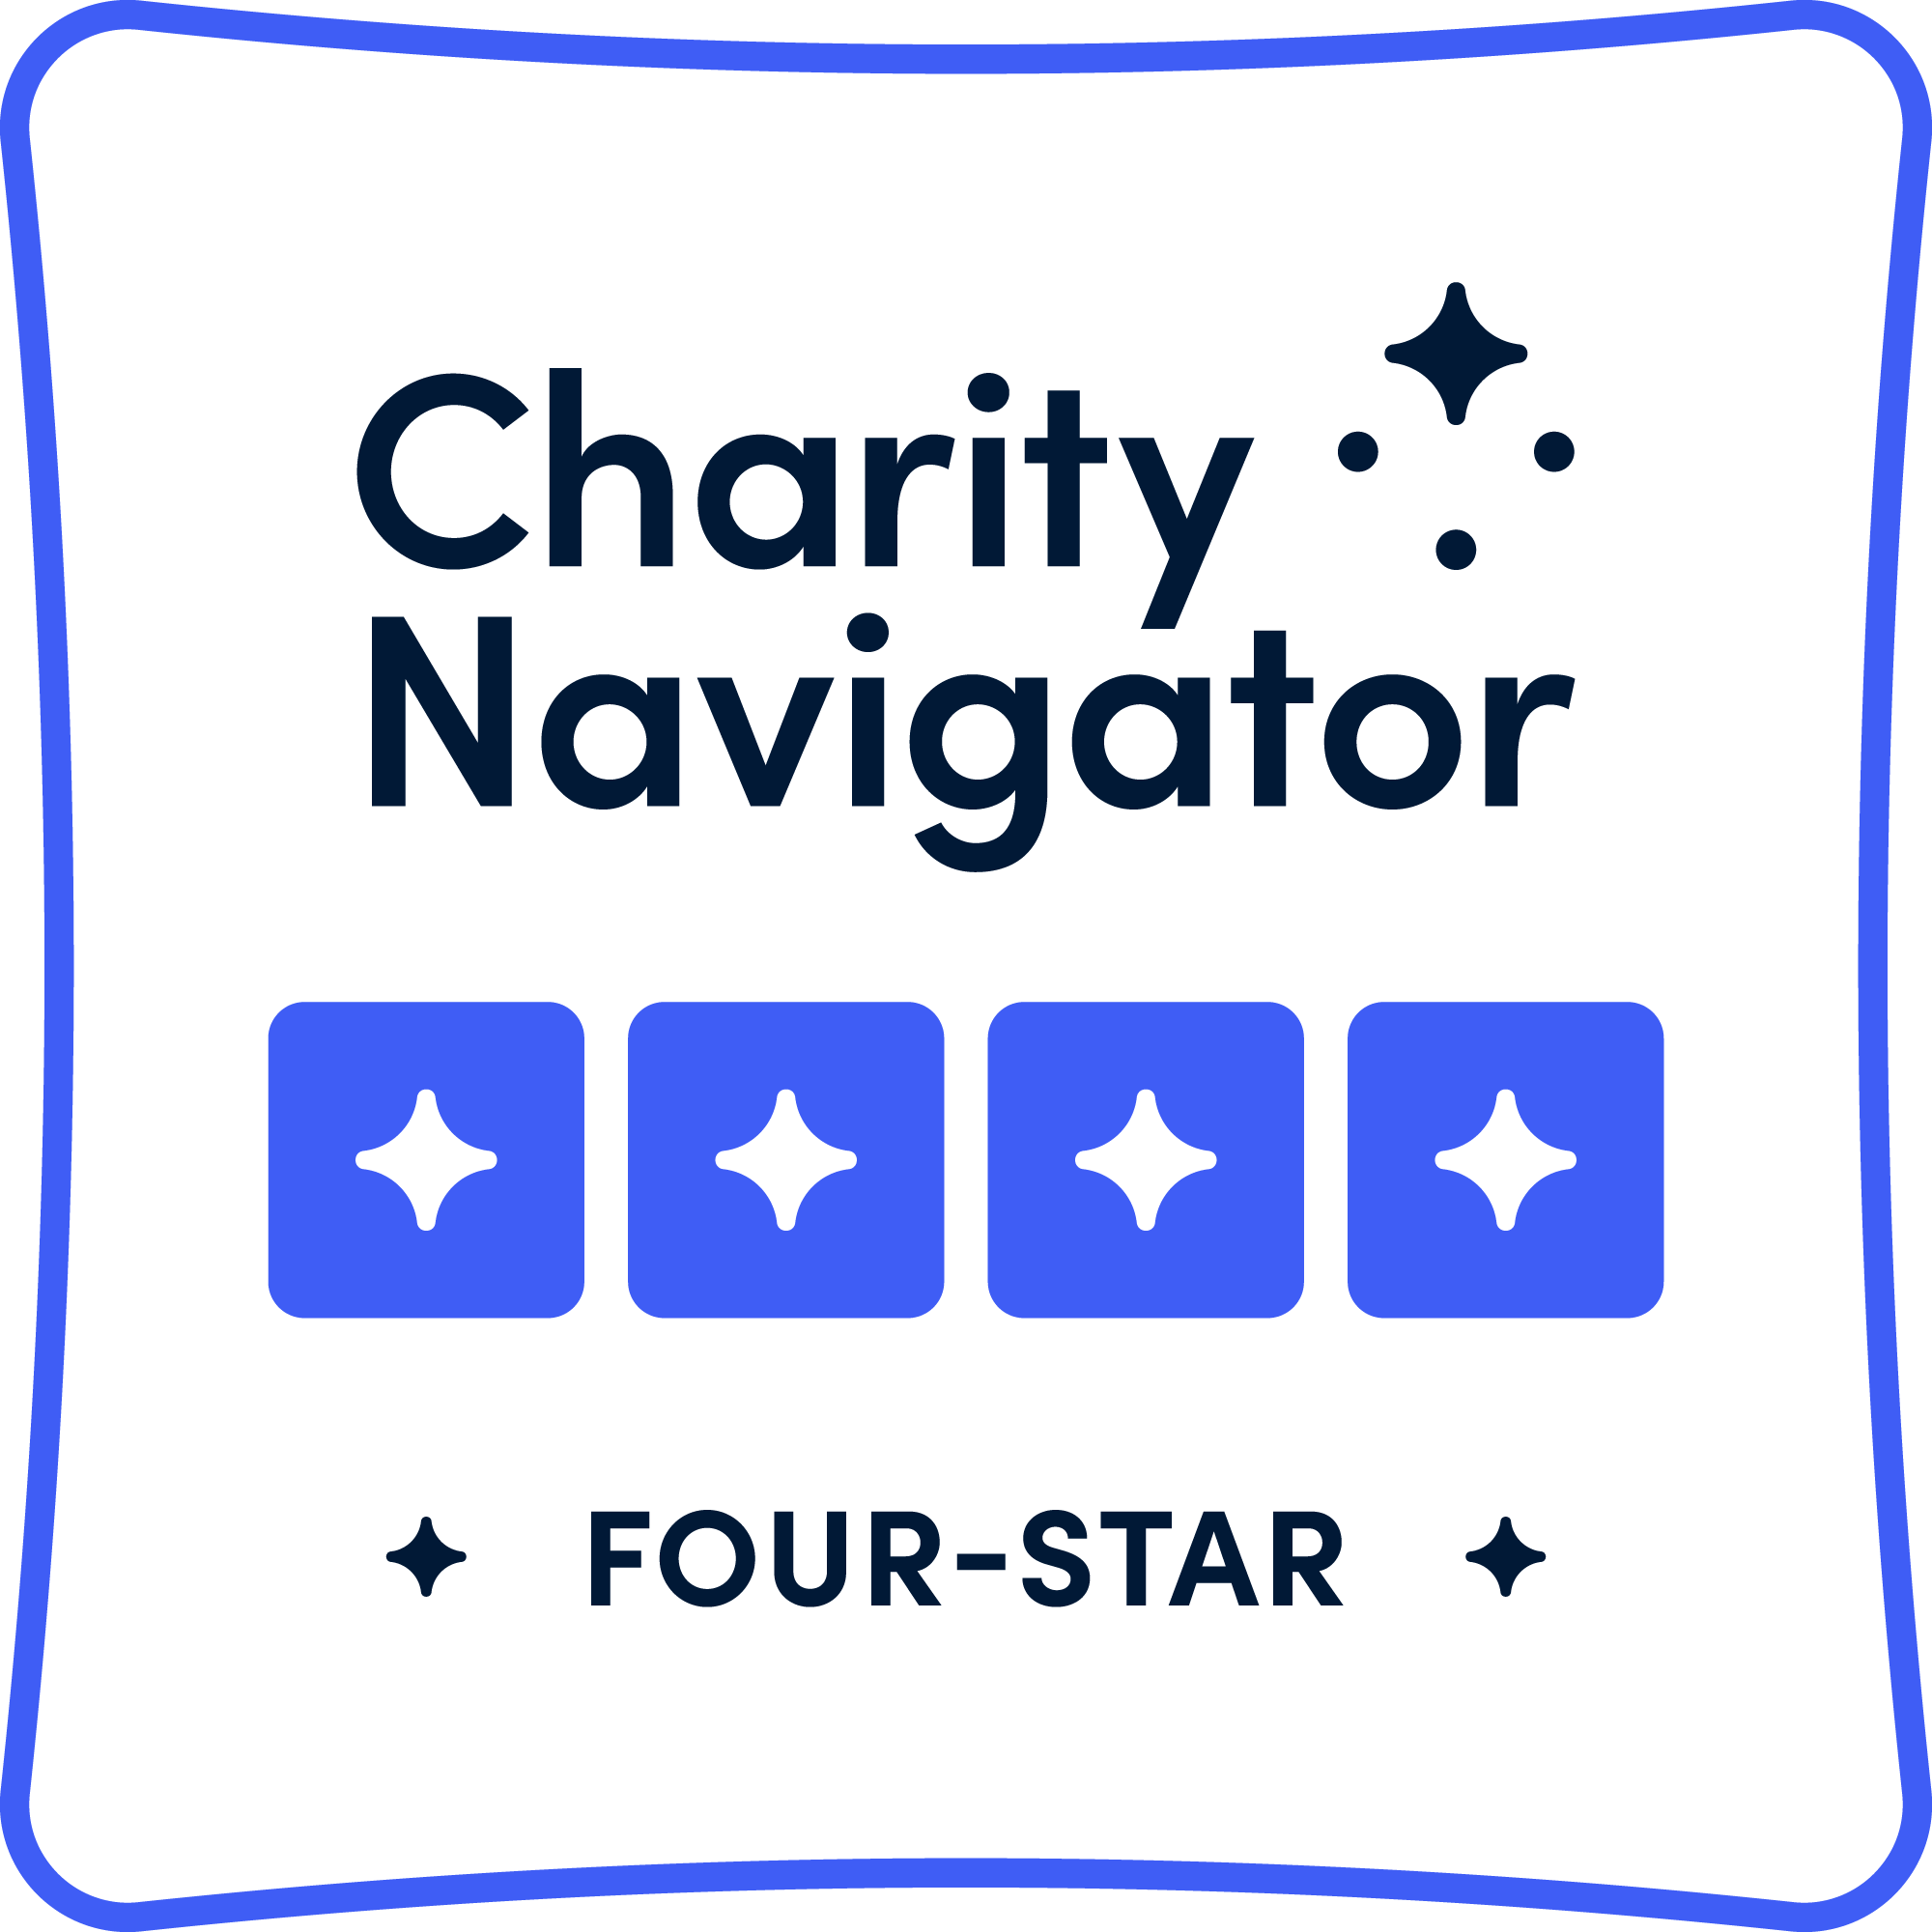 Women's Bean Project earns Charity Navigator Four-Star Rating.